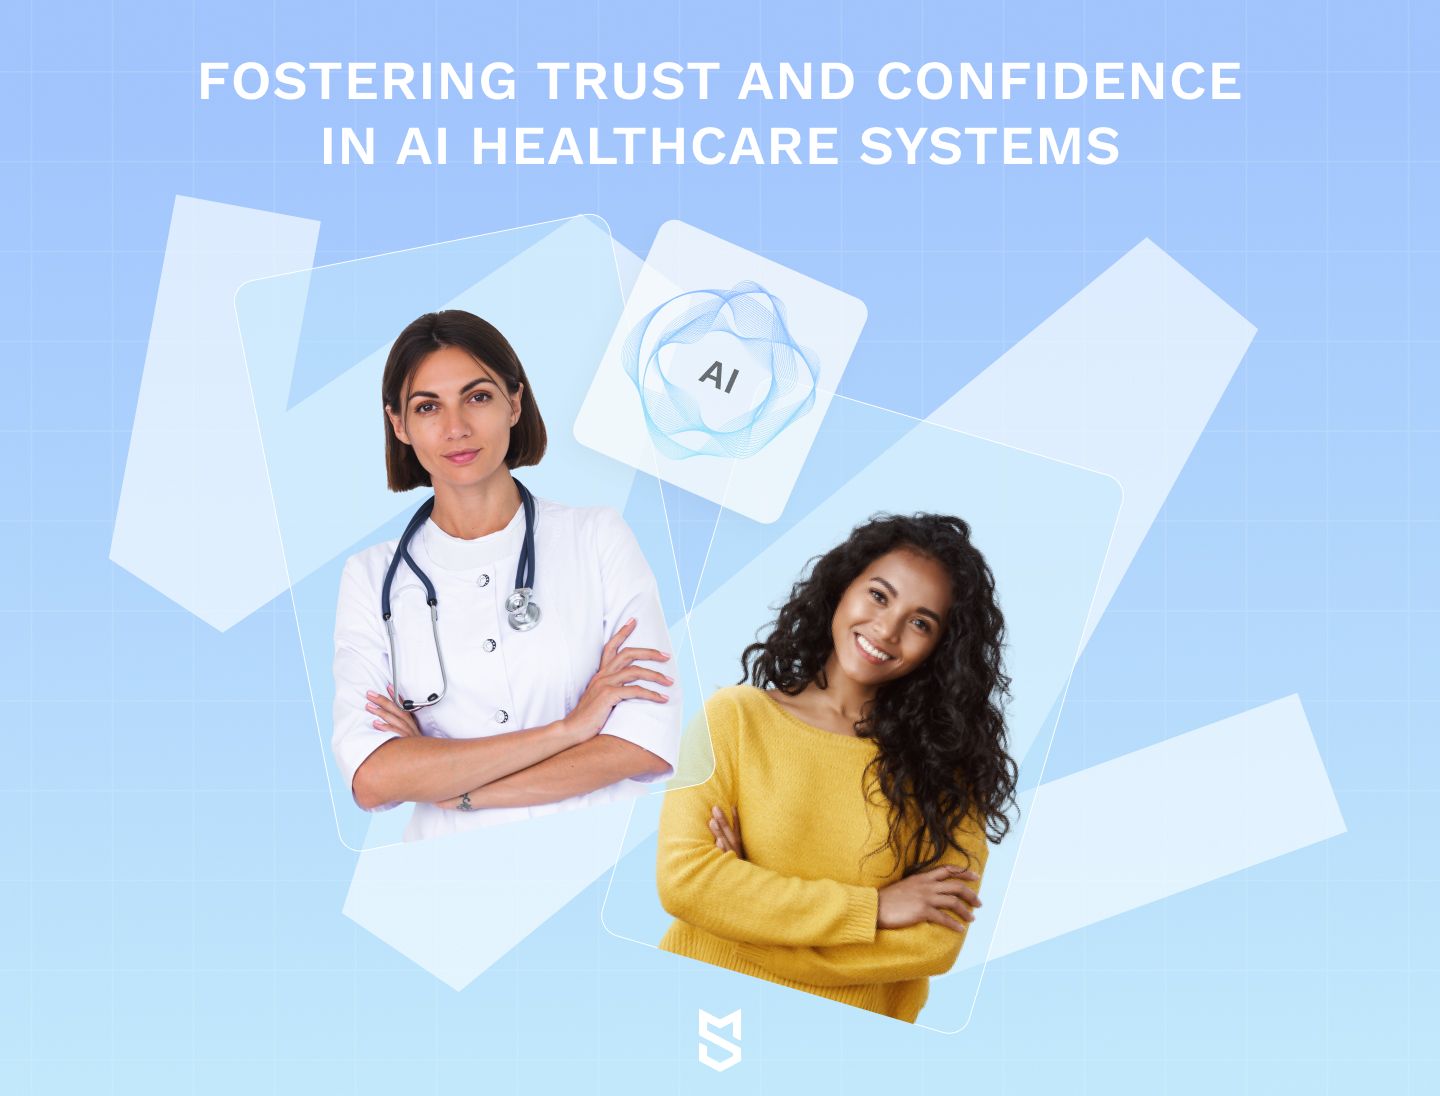 Fostering trust and confidence in AI healthcare systems